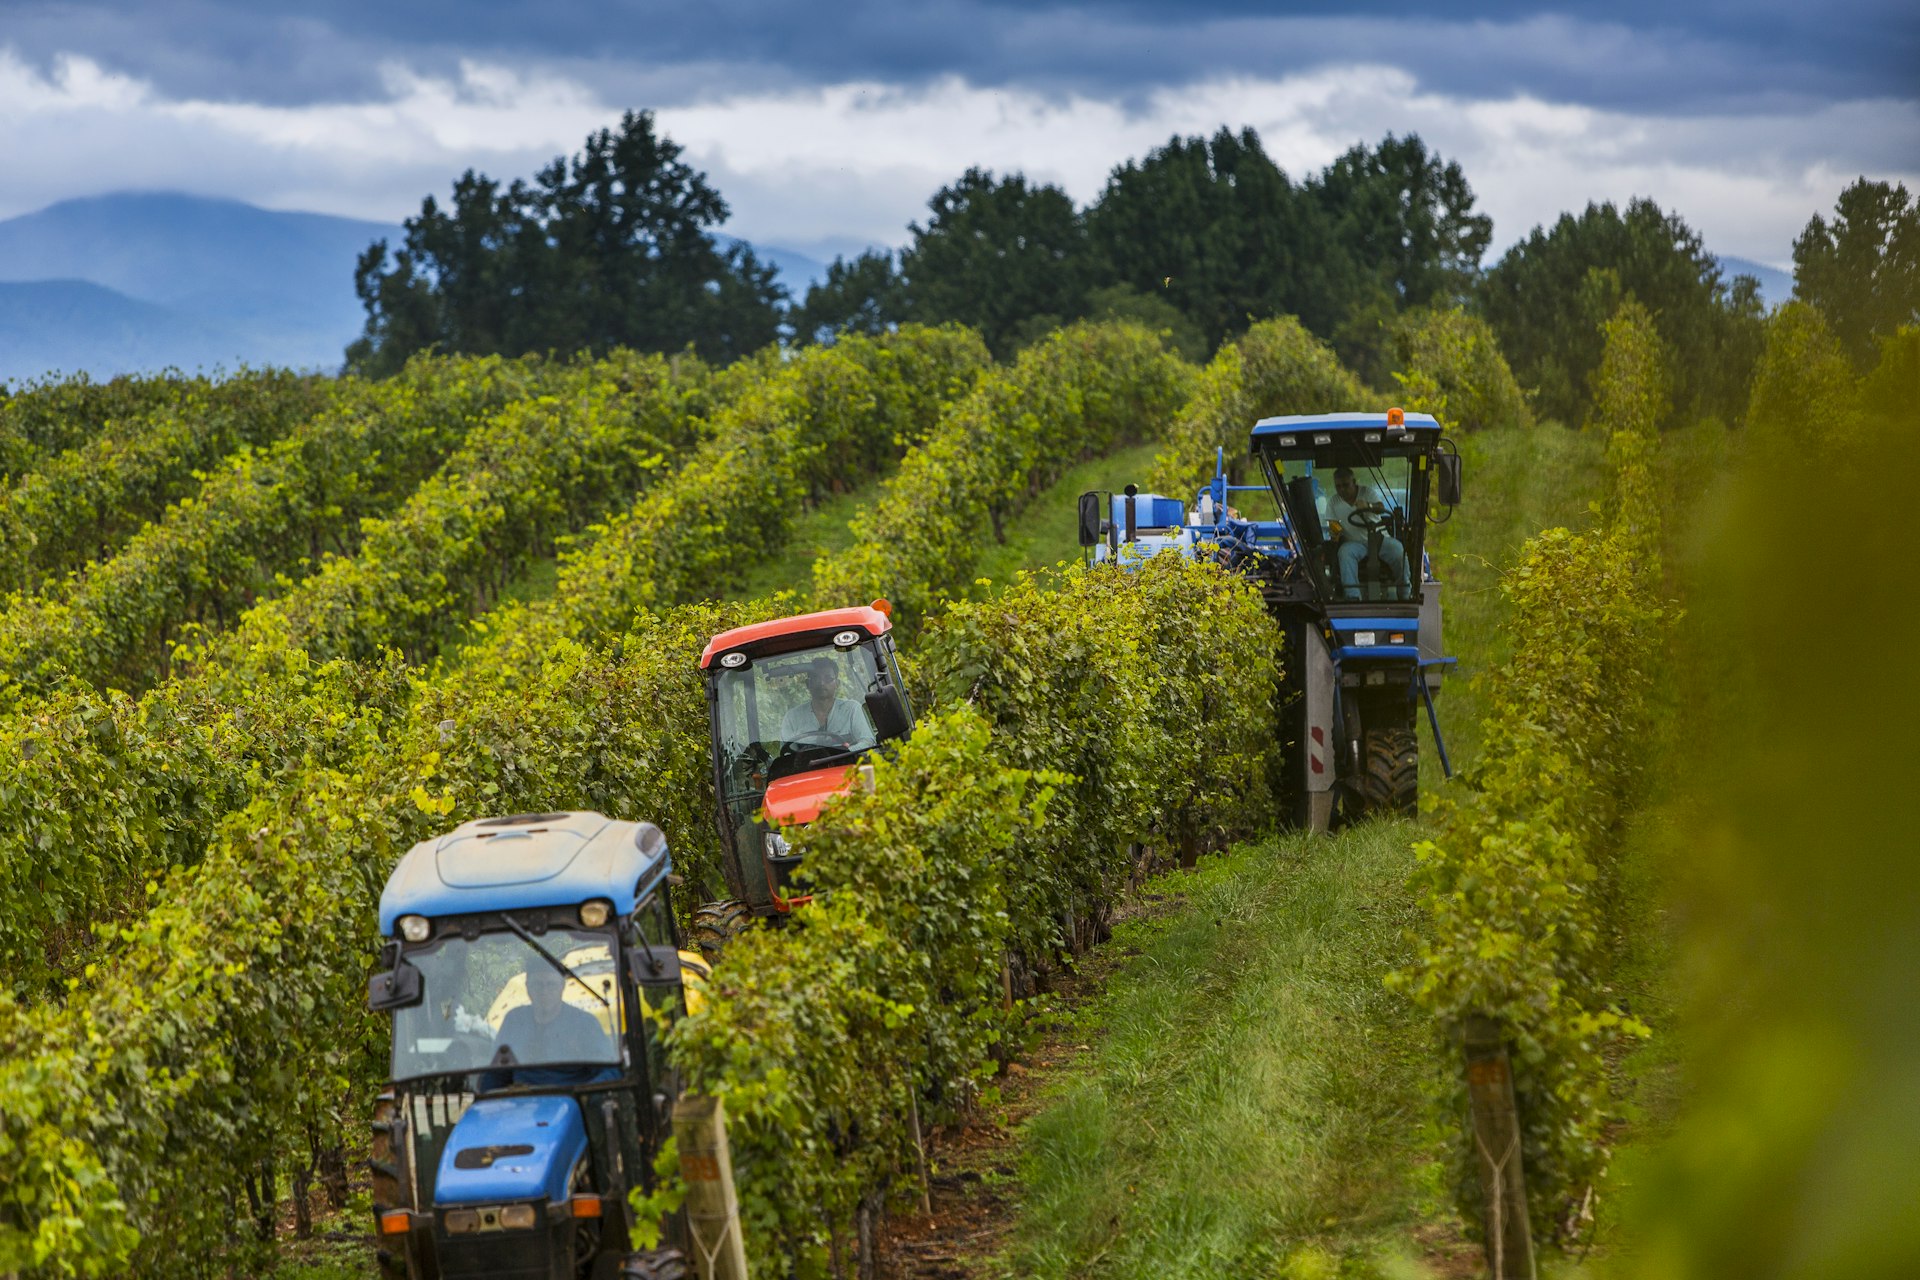 Blowers and harvest machines comb the vineyards drying and plucking grapes for winemaking after a downpour at Barboursville Vineyards in Gordonsville, Virgina 